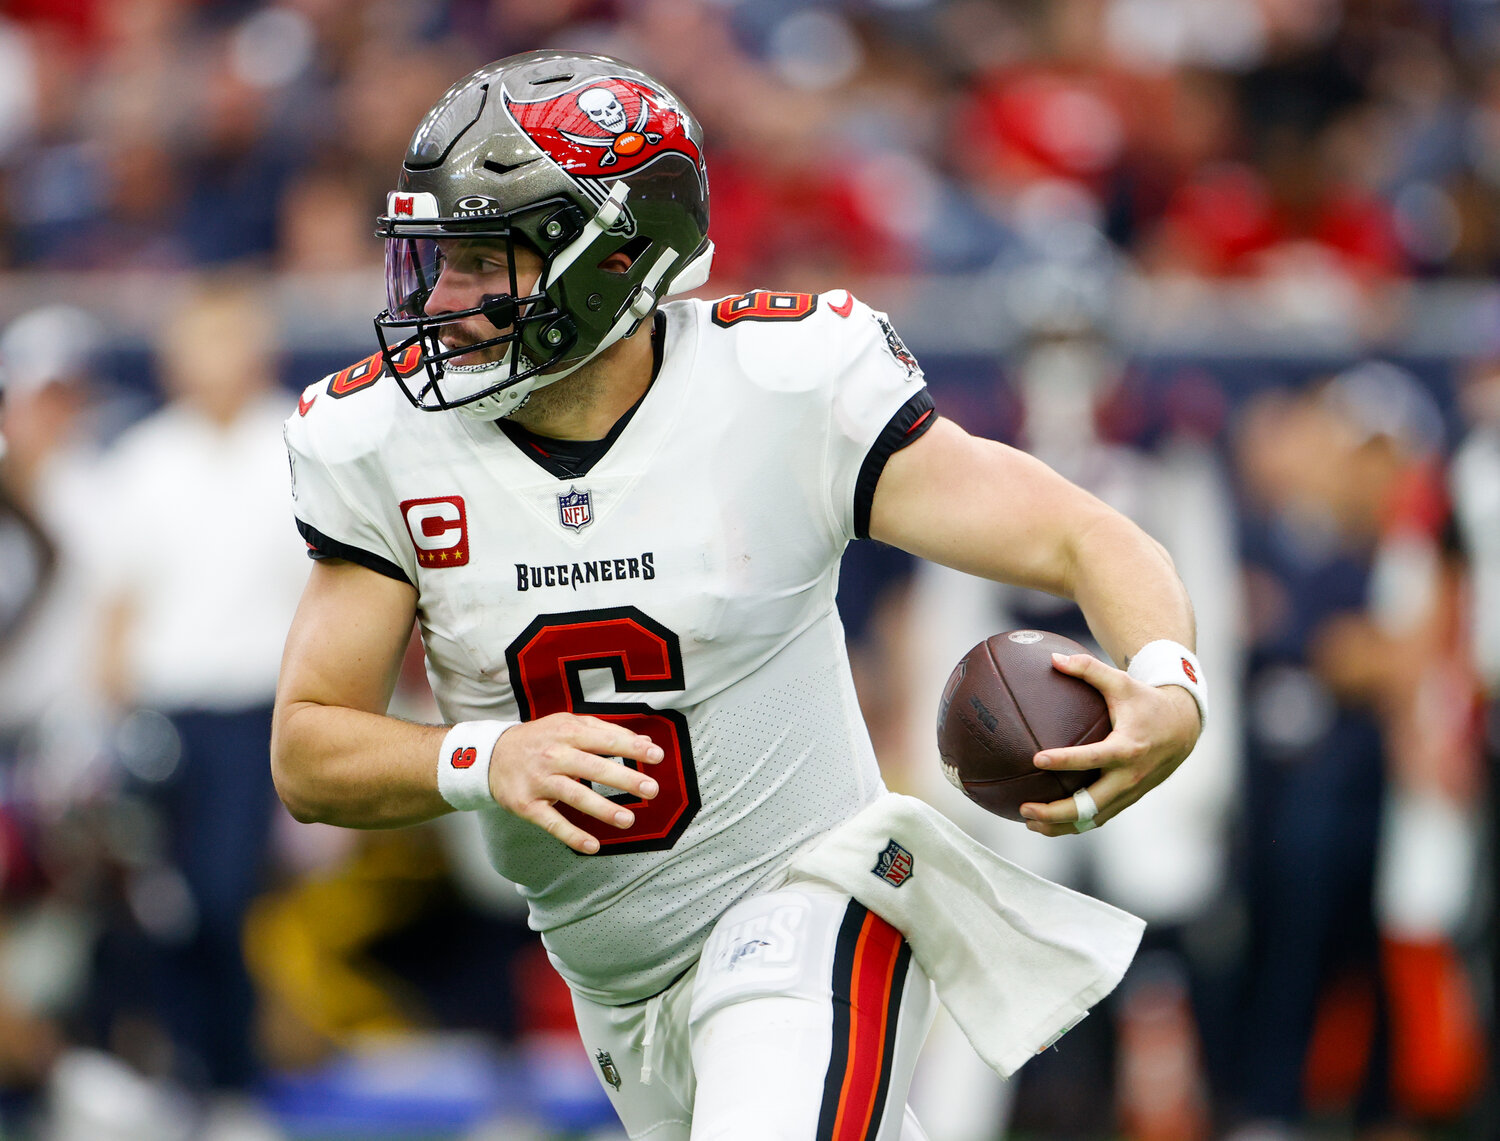 Buccaneers quarterback Baker Mayfield (6) carries the ball during an NFL game between the Houston Texans and the Tampa Bay Buccaneers on November 5, 2023 in Houston.